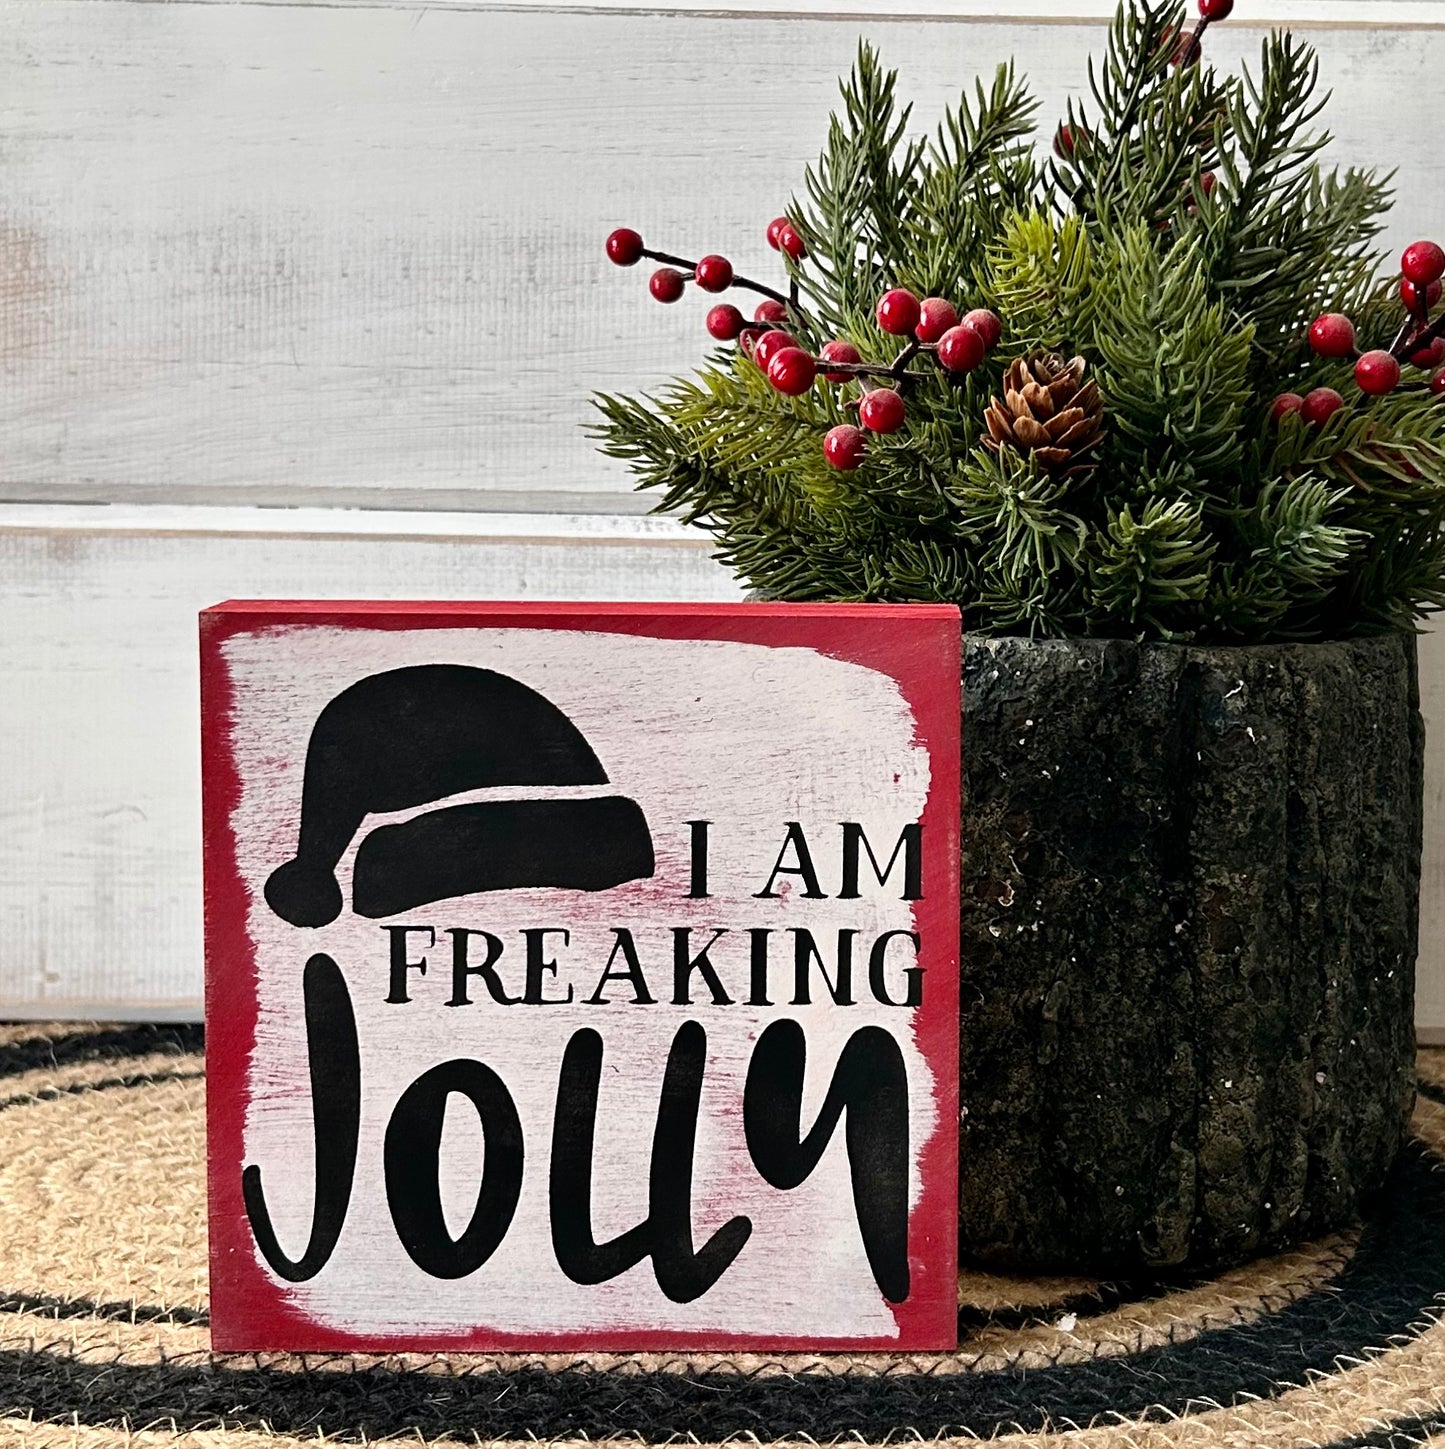 "freaking jolly" funny wood sign